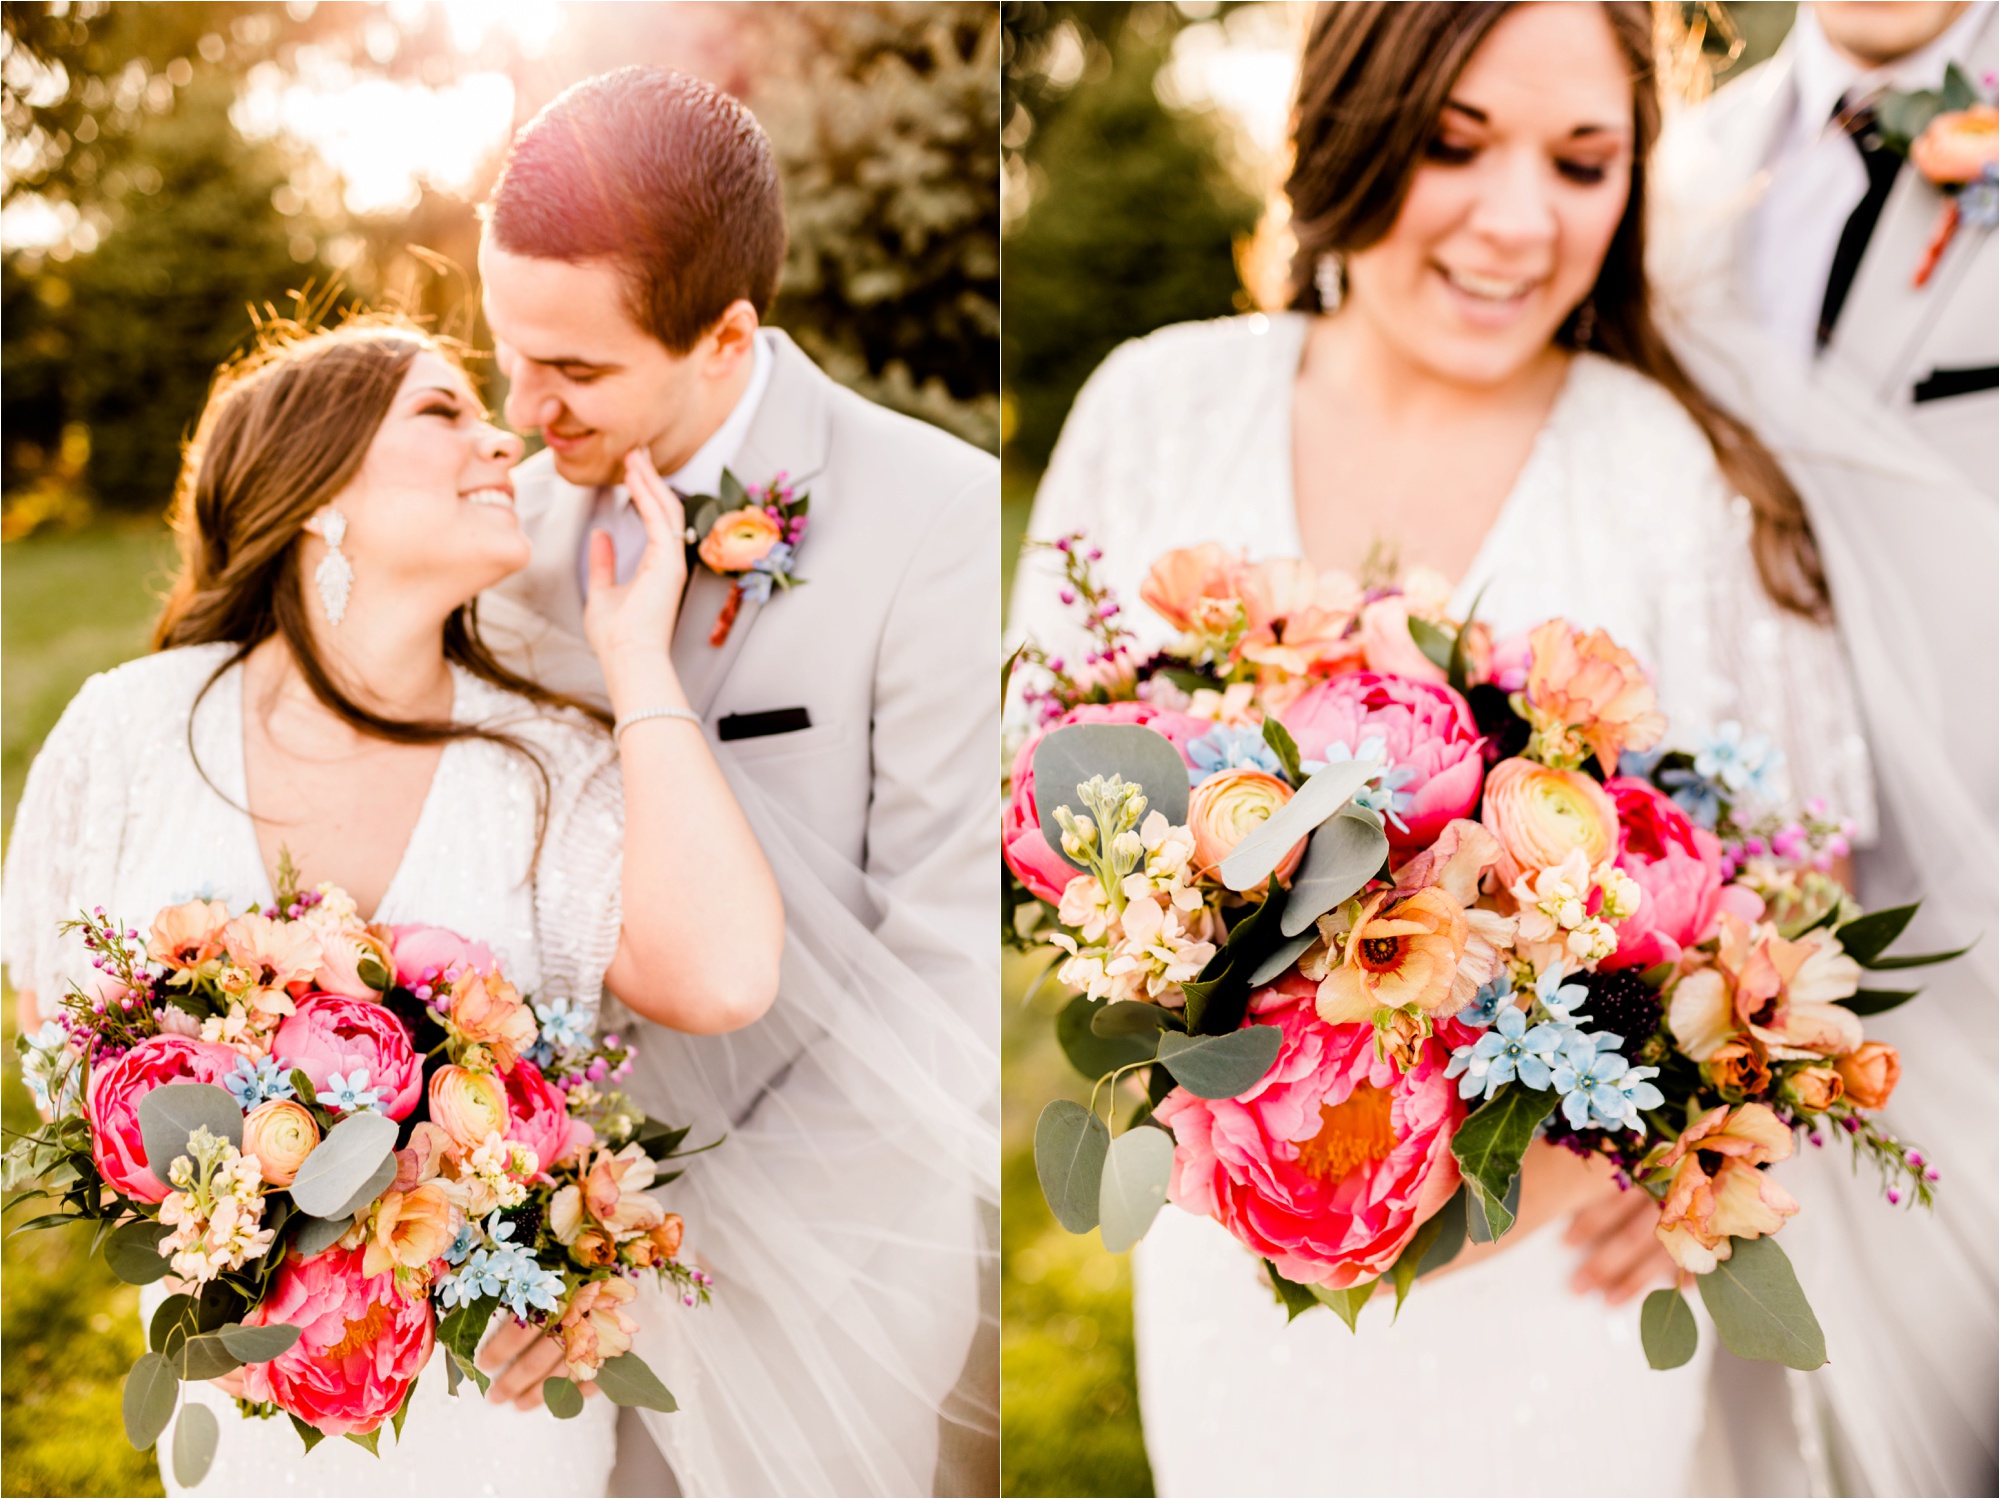 Caitlin and Luke Photography, Illinois Wedding Photographers, Champaign Wedding Photographers, Bloomington Normal Wedding Photographers, Romantic Red and Pink Sunset Styled Shoot_9553.jpg